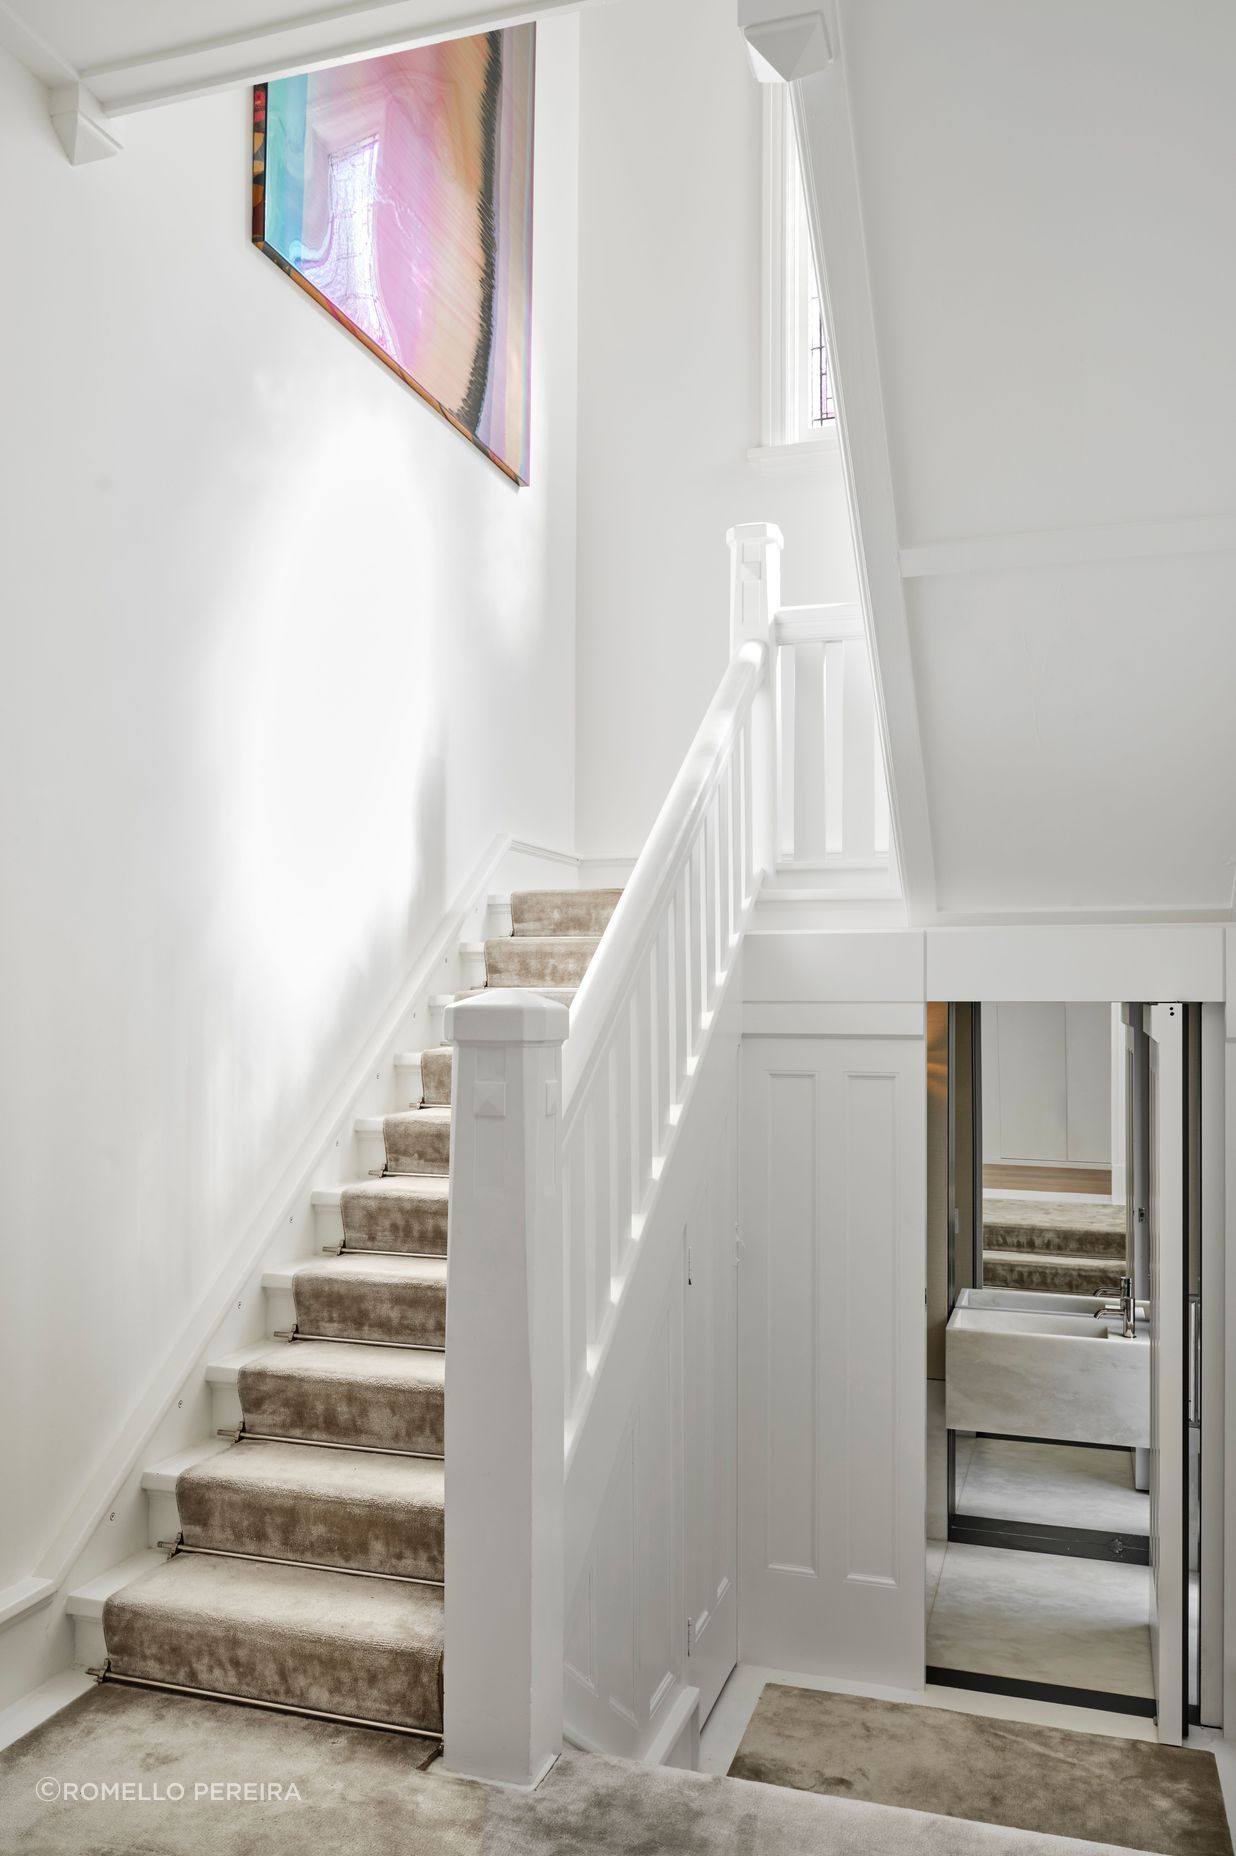 The home's original stairwell was revitalised.